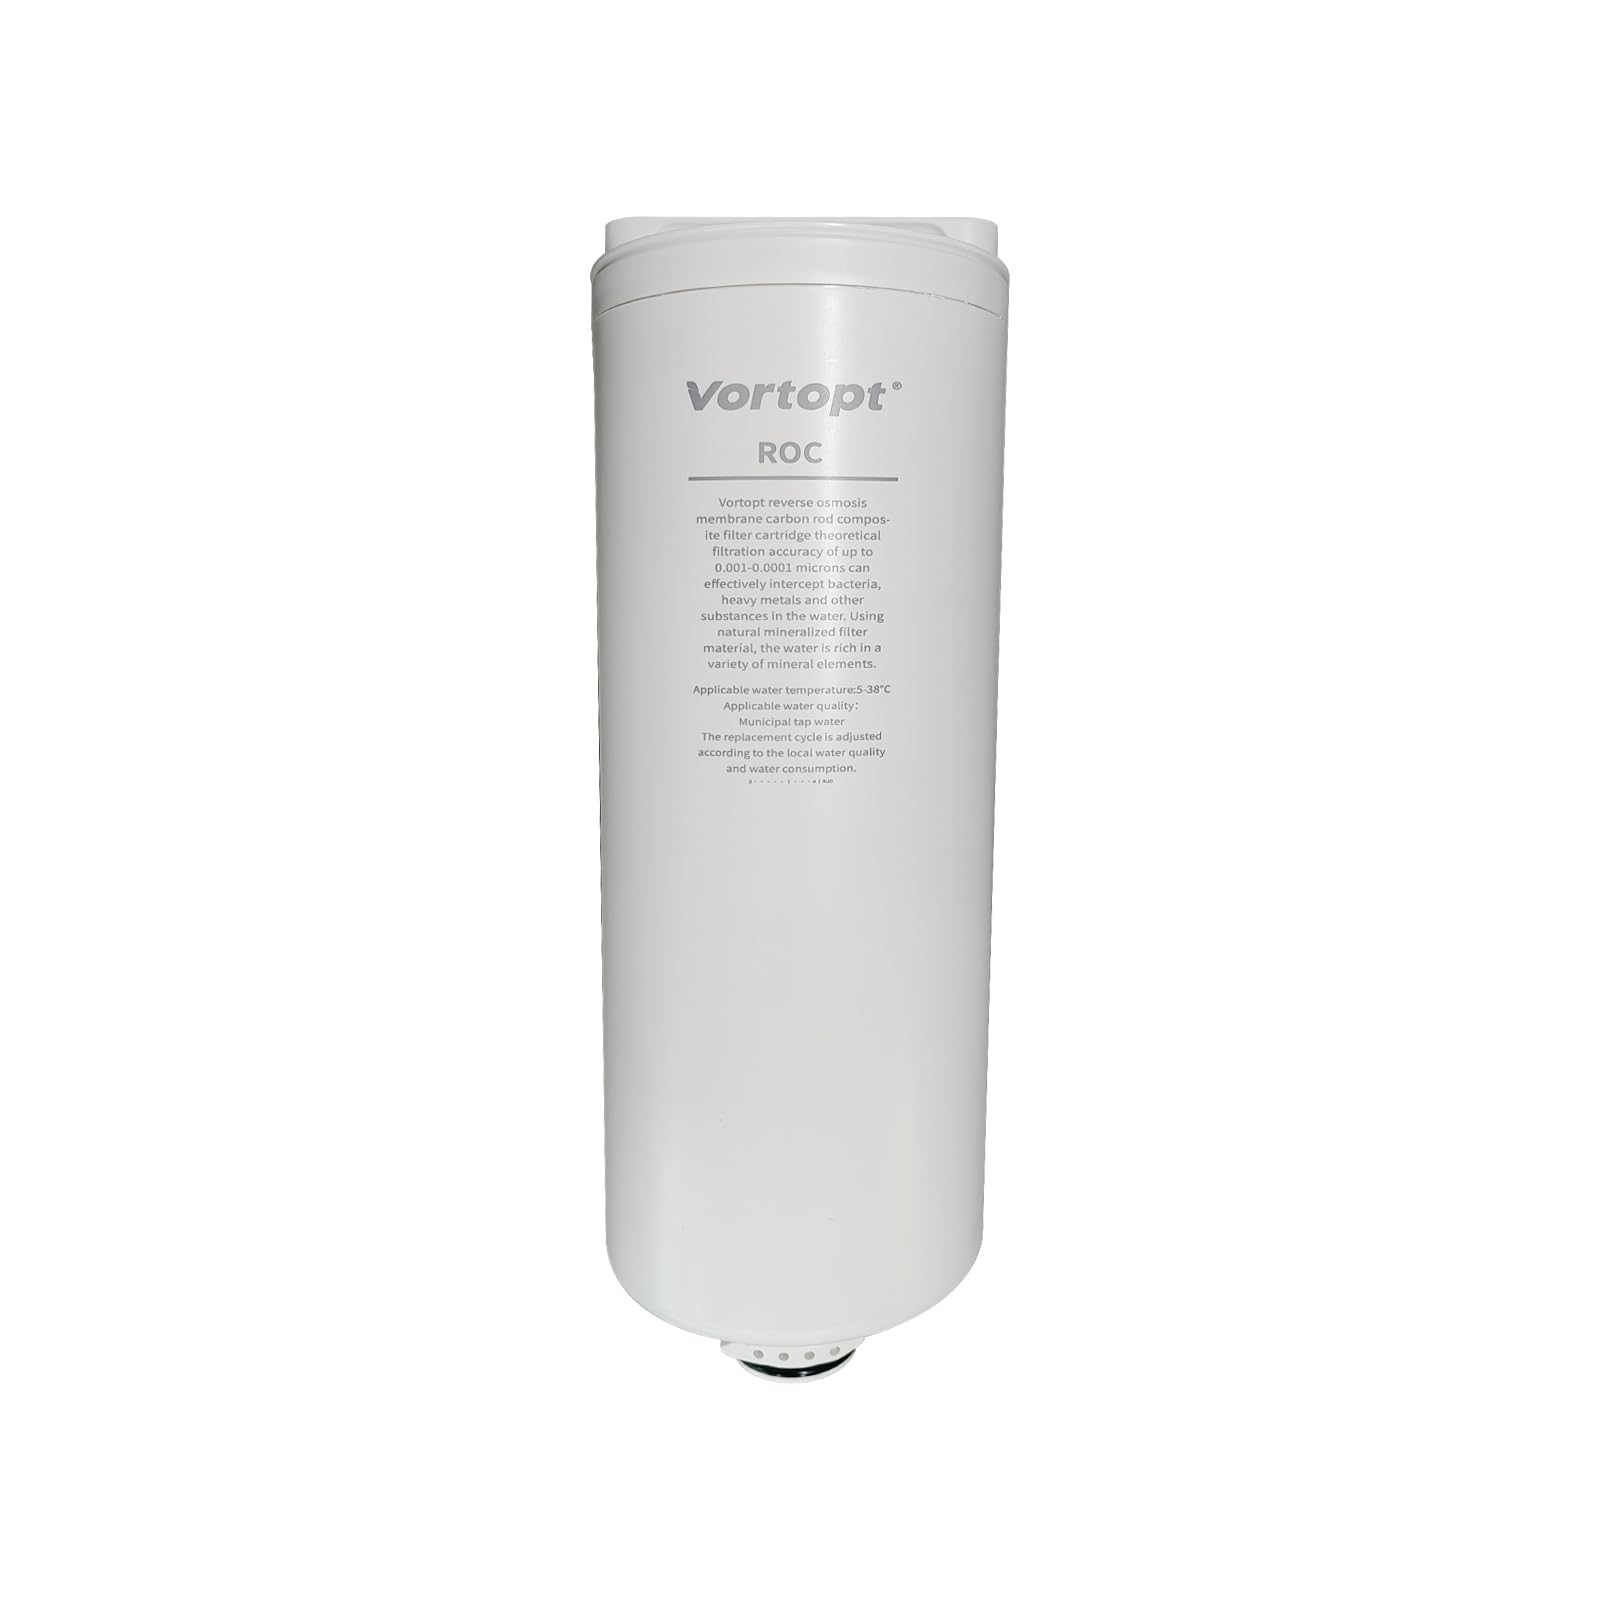 ROC Replacement Filter Compatible with DR5-1000G Under-sink Reverse Osmosis Water Filter System,Vortopt 